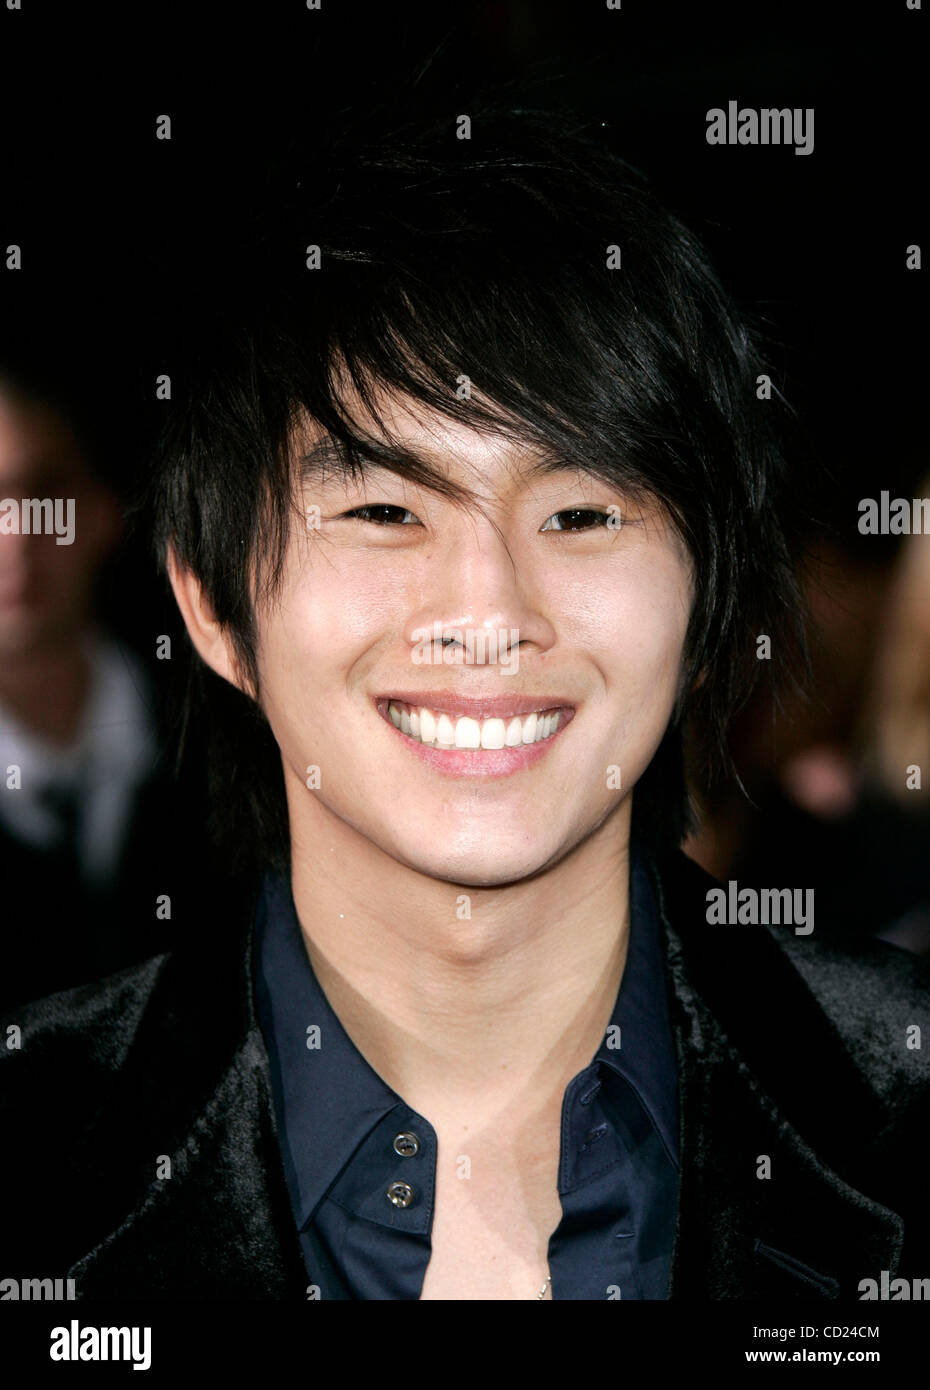 Nov 17, 2008 - Westwood, California, USA - Actor JUSTIN CHON arriving to the 'Twilight' World Premiere held at the Mann Village & Bruin Theatres. (Credit Image: © Lisa O'Connor/ZUMA Press) Stock Photo